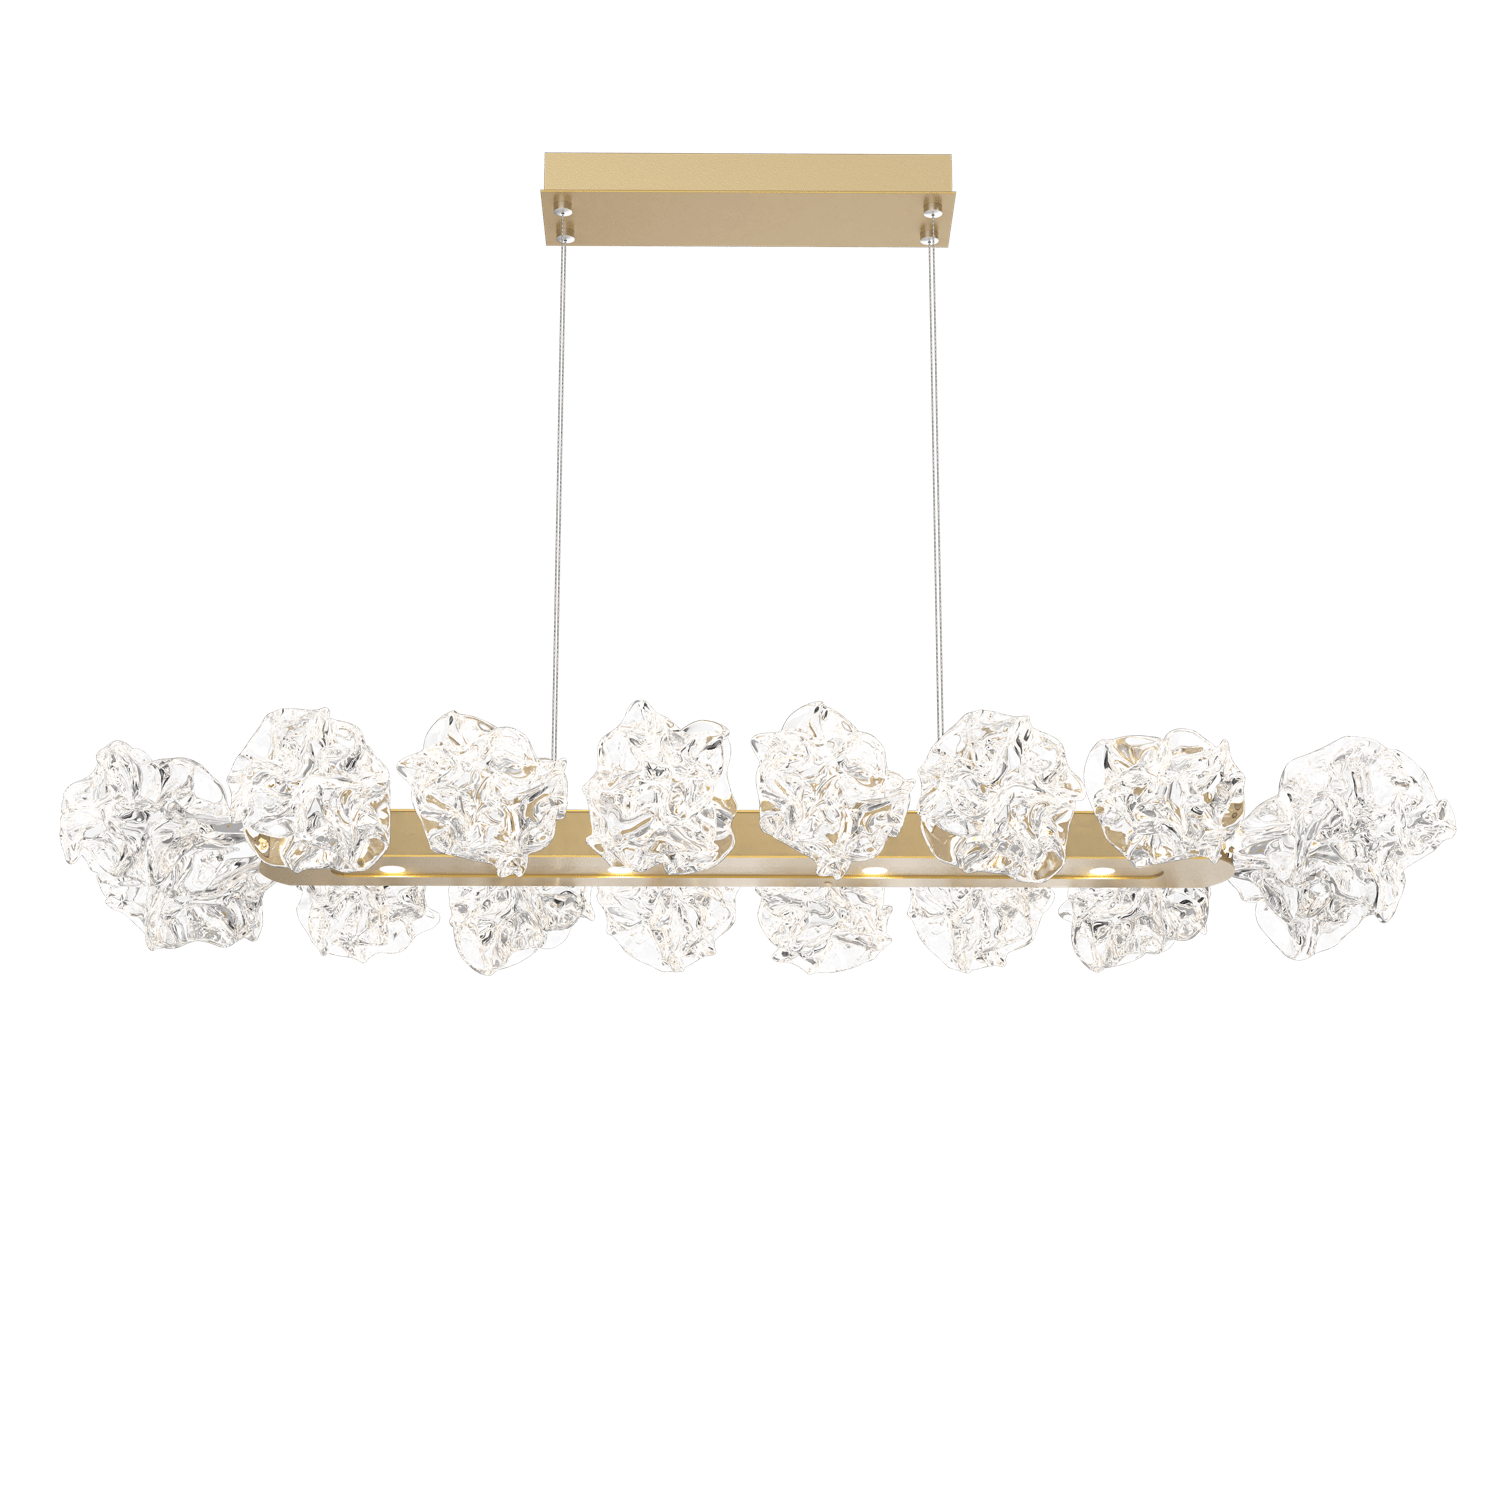 PLB0059-48-GB-Hammerton-Studio-Blossom-48-inch-linear-chandelier-with-gilded-brass-finish-and-clear-handblown-crystal-glass-shades-and-LED-lamping